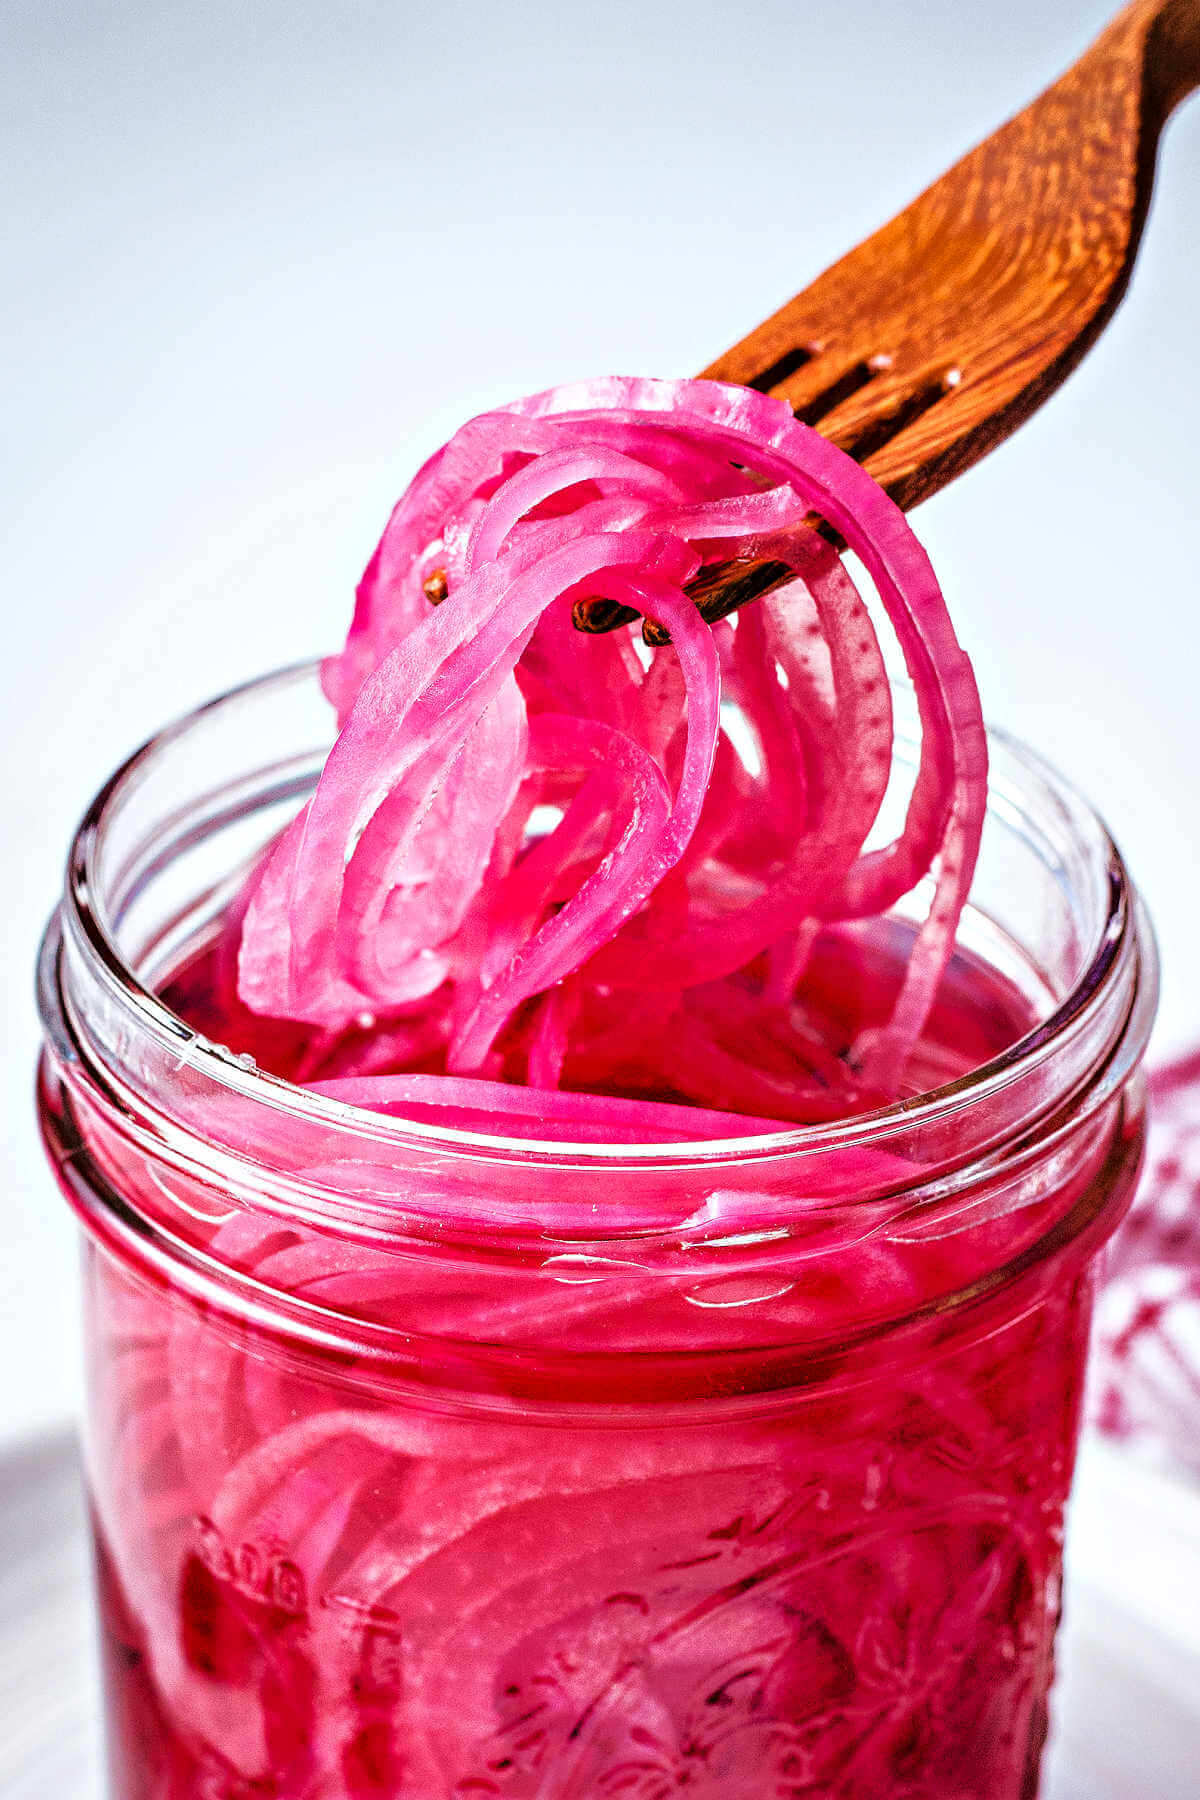 a wooden fork lifting out pickled red onions from a jar.